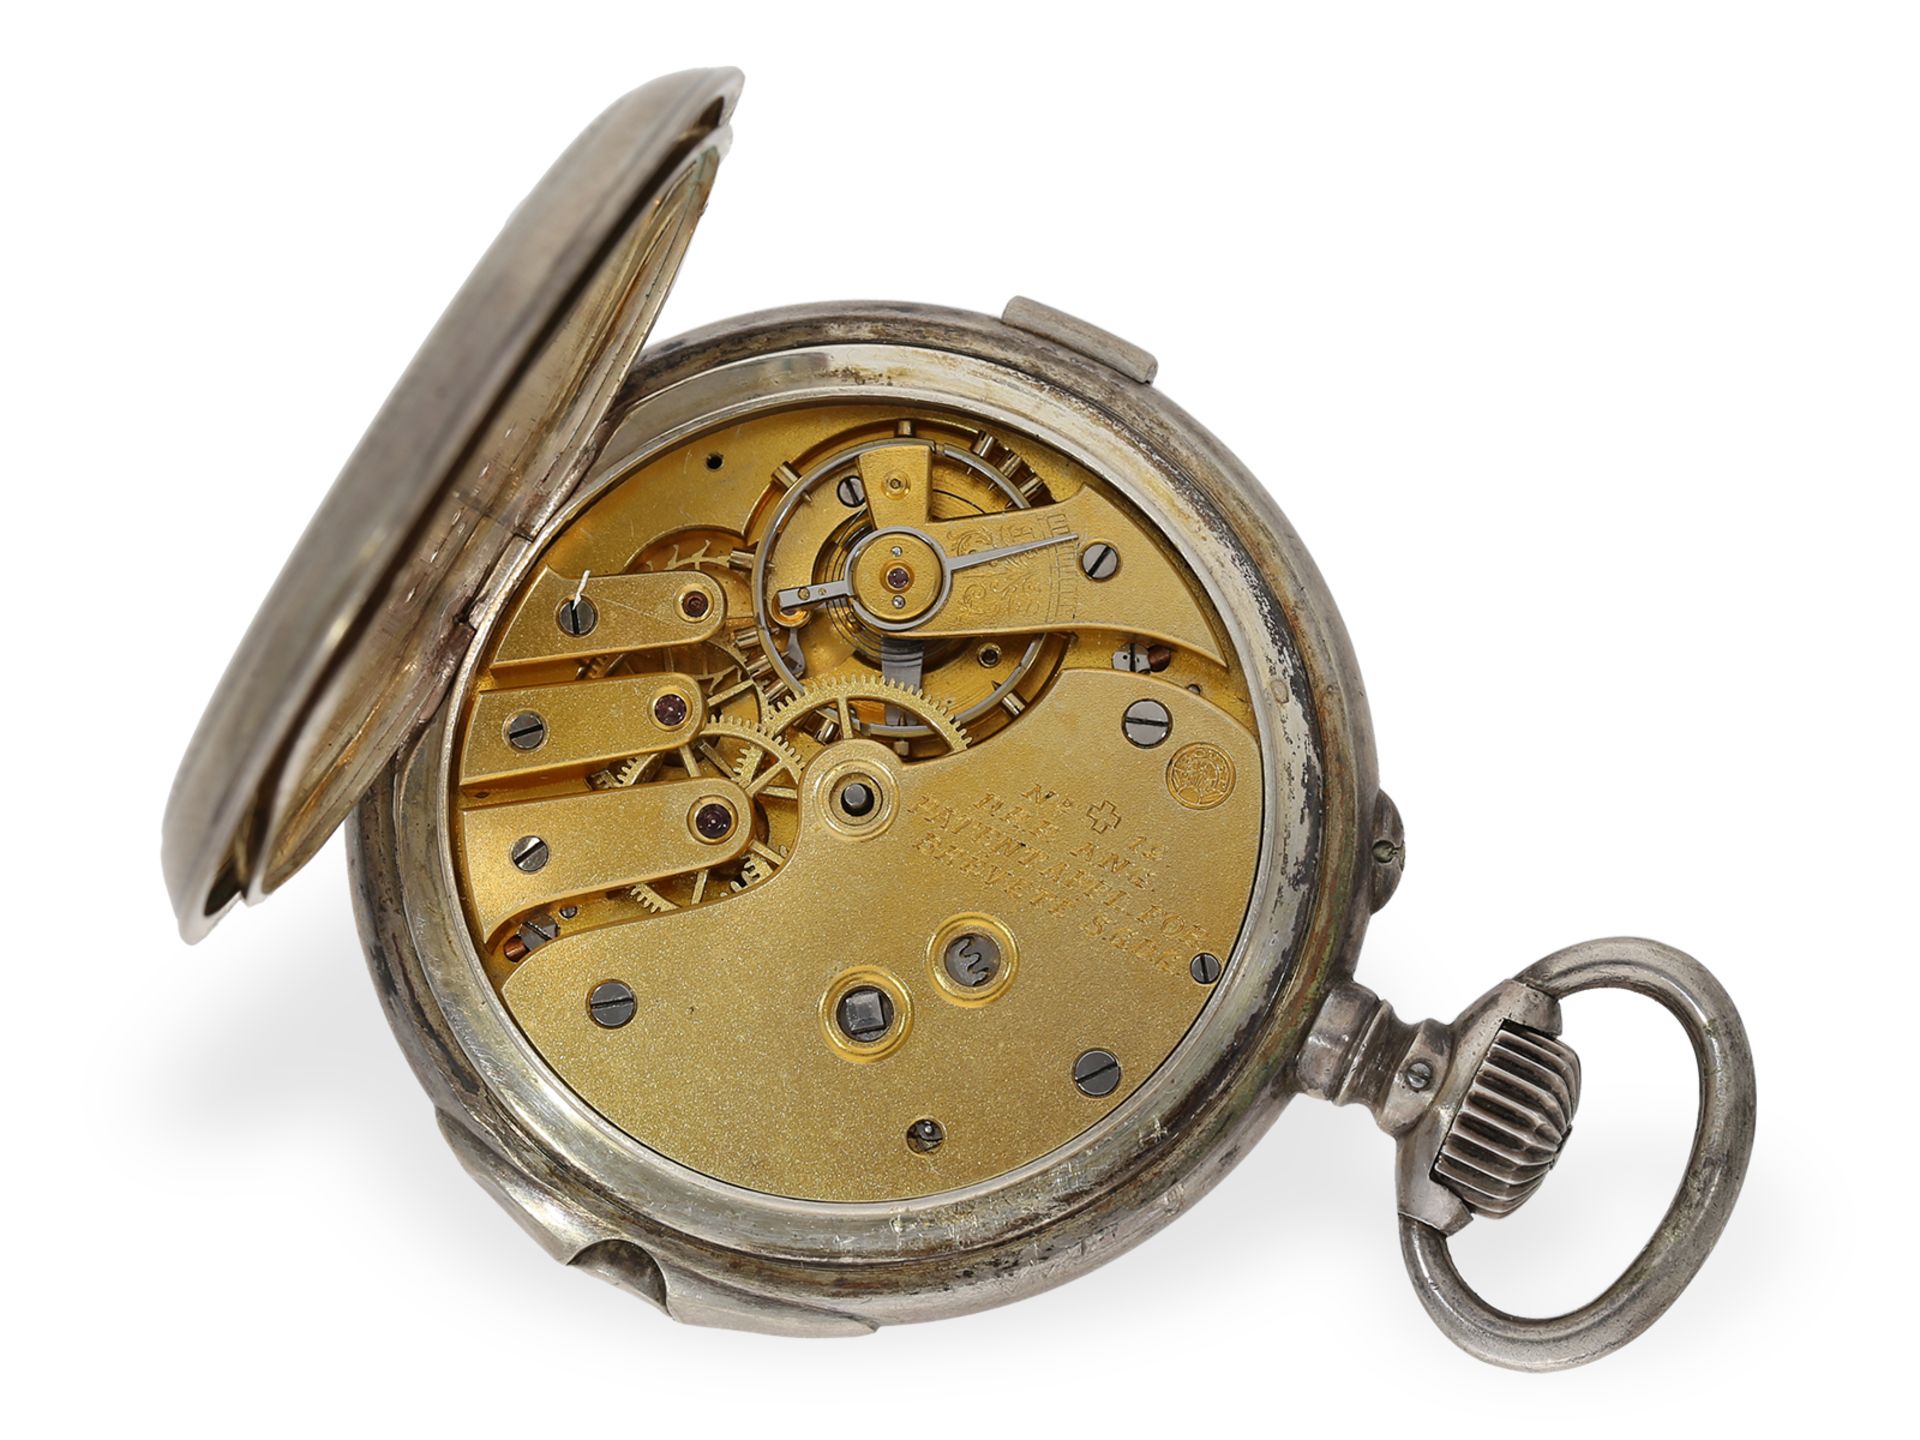 Pocket watch: technically interesting split-seconds chronograph, Bovet "Montre Universelle" ca. 1890 - Image 2 of 7